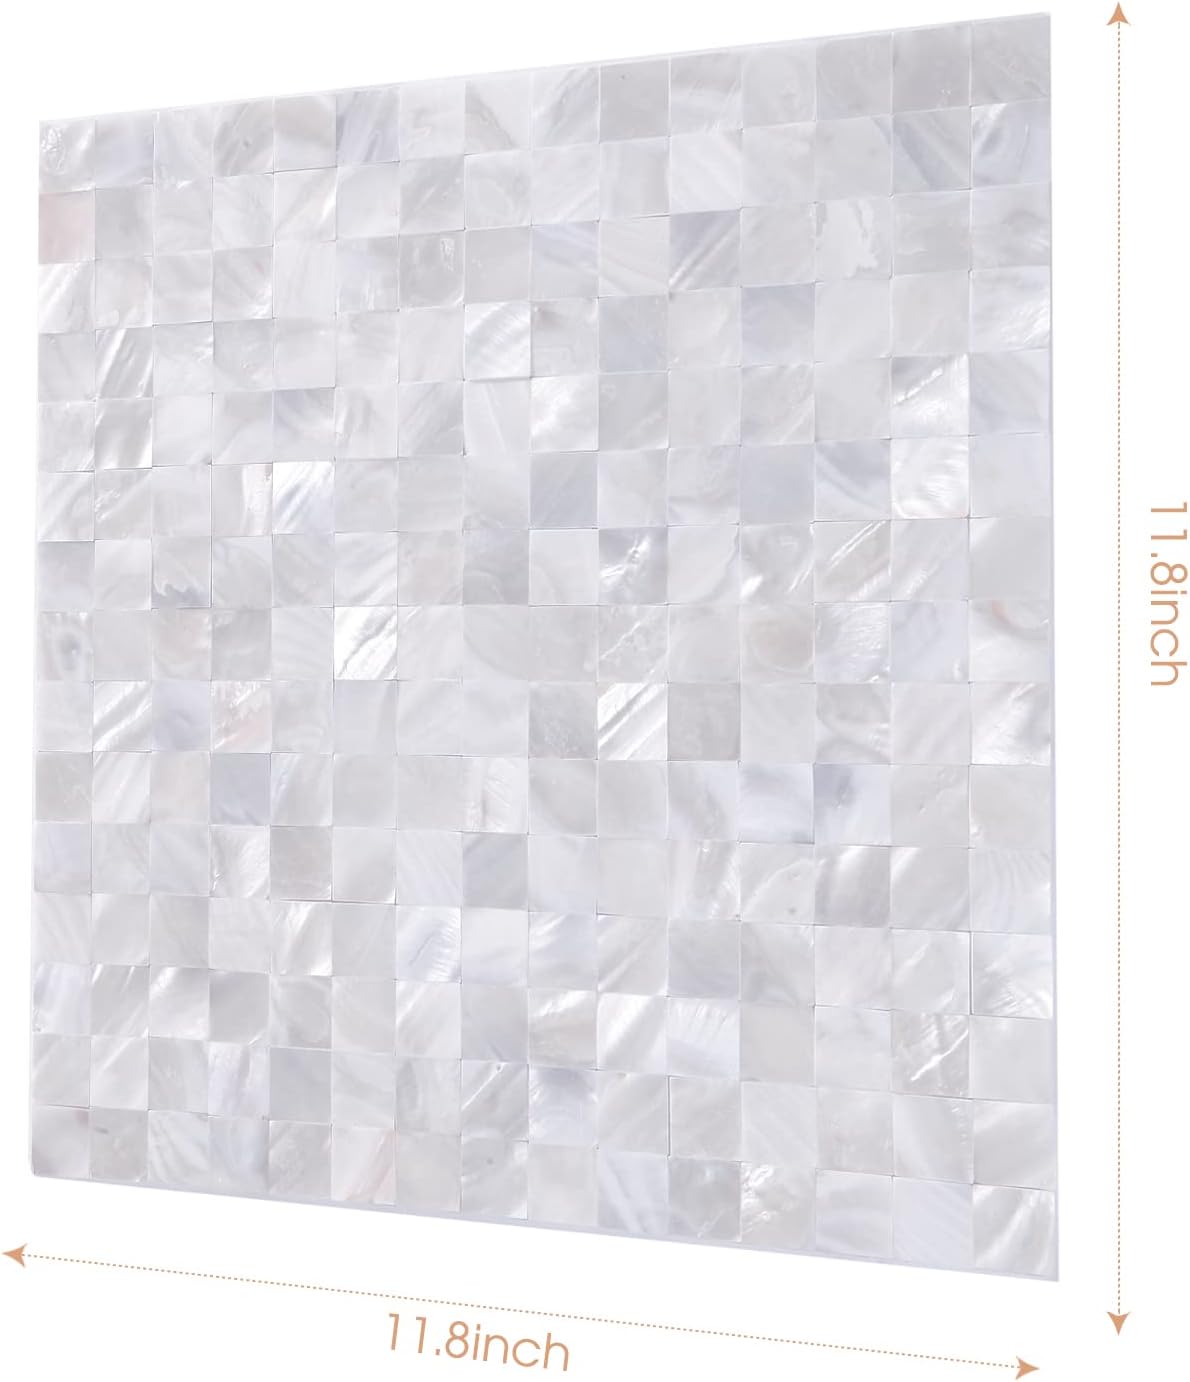 mosaic mother of pearl peel and stick tiles in White Nature detail image